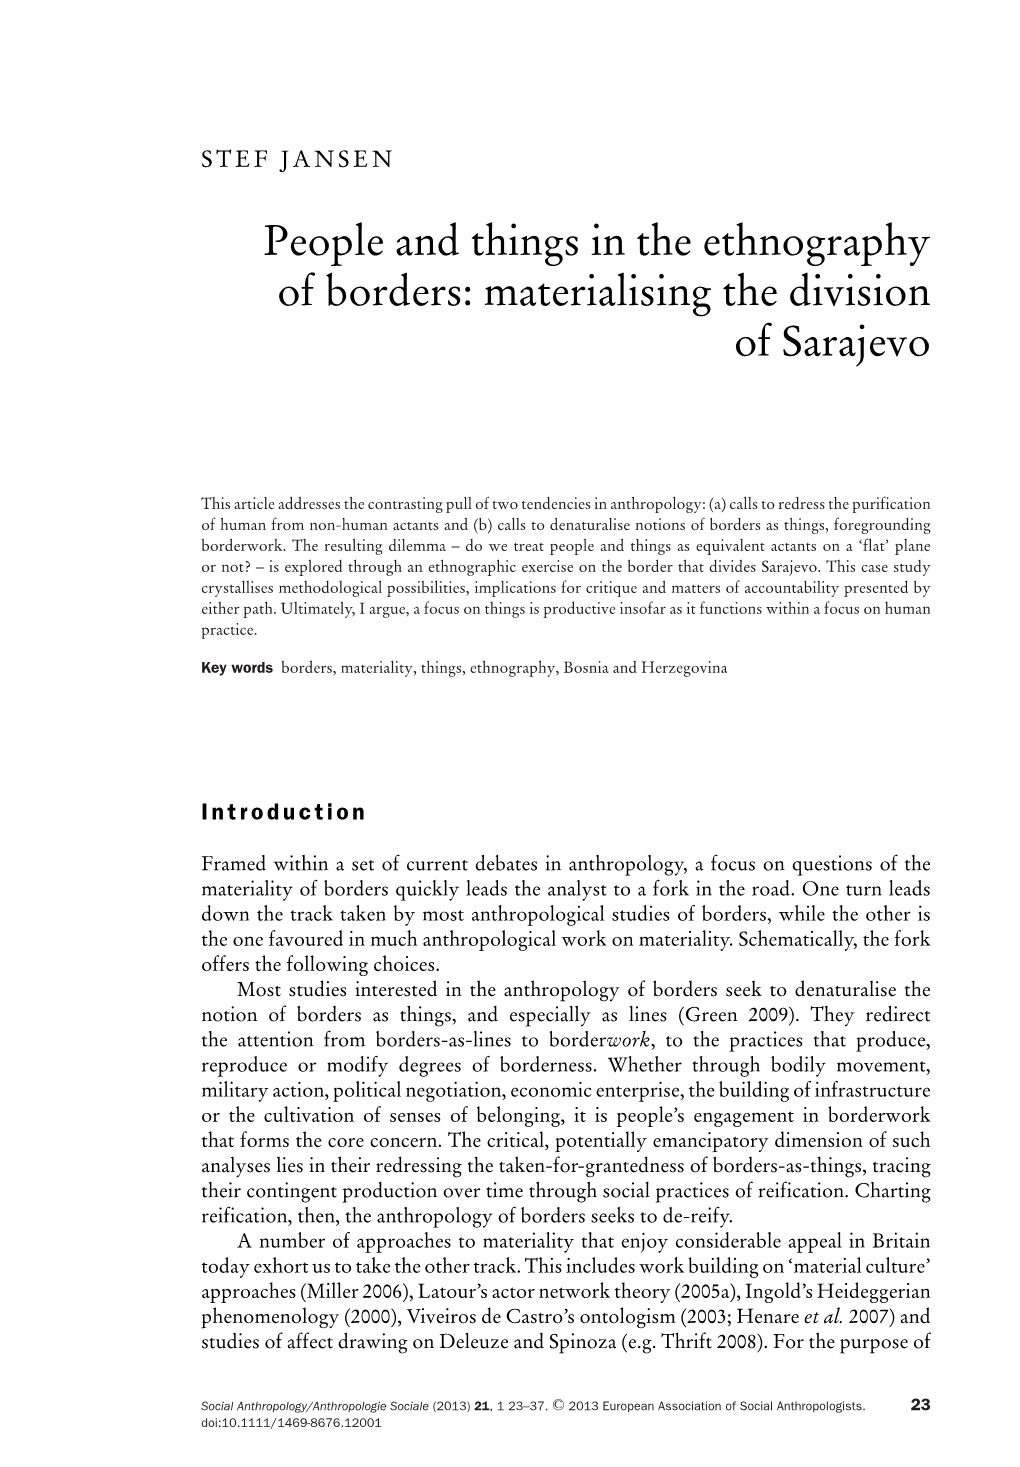 People and Things in the Ethnography of Borders: Materialising the Division of Sarajevo